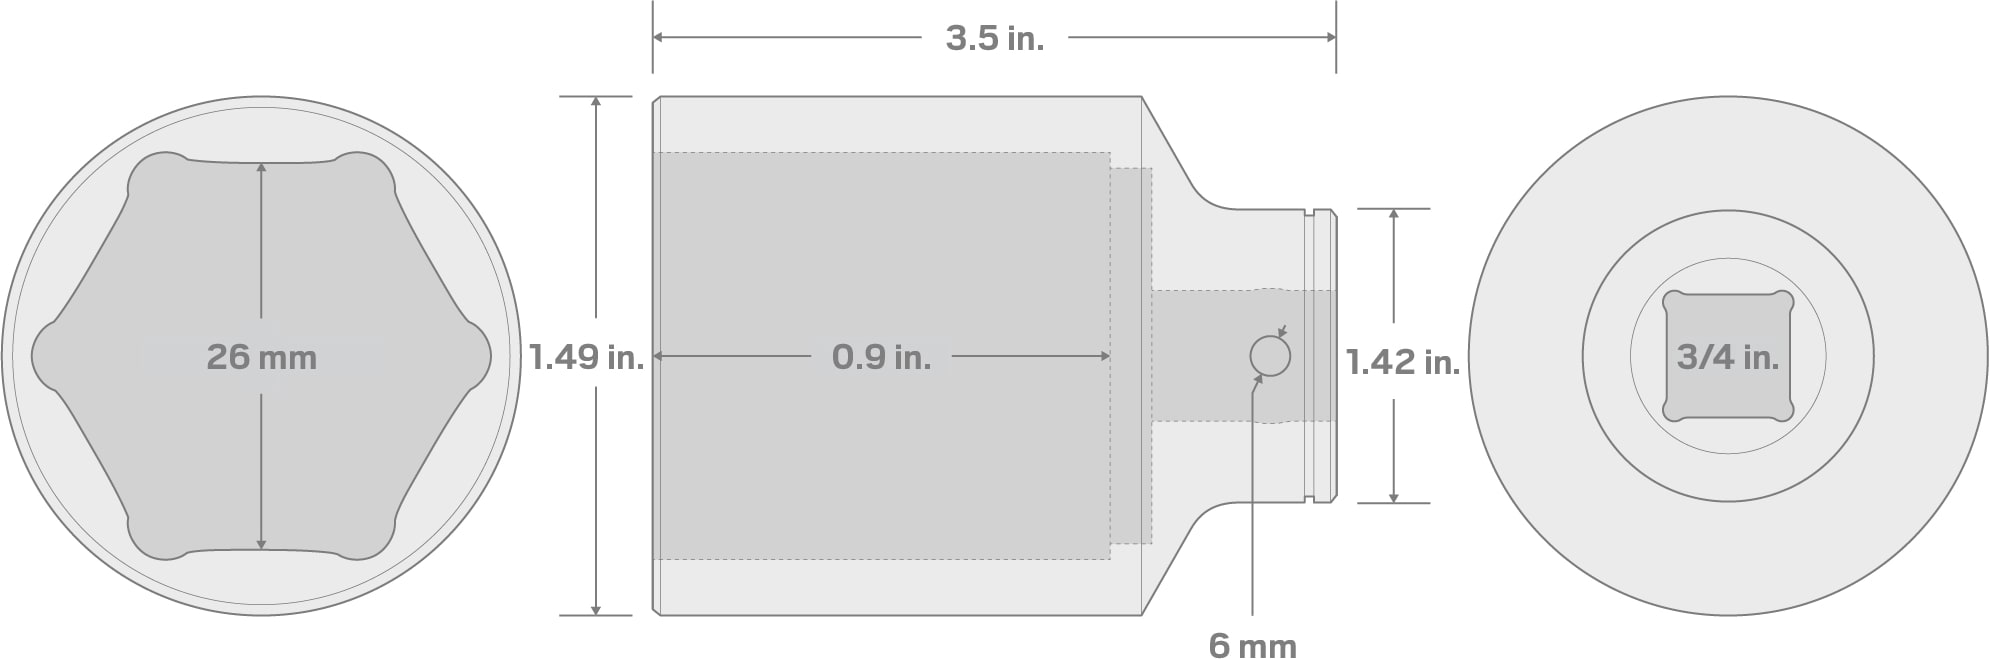 Specs for 3/4 Inch Drive x 26 mm Deep 6-Point Socket